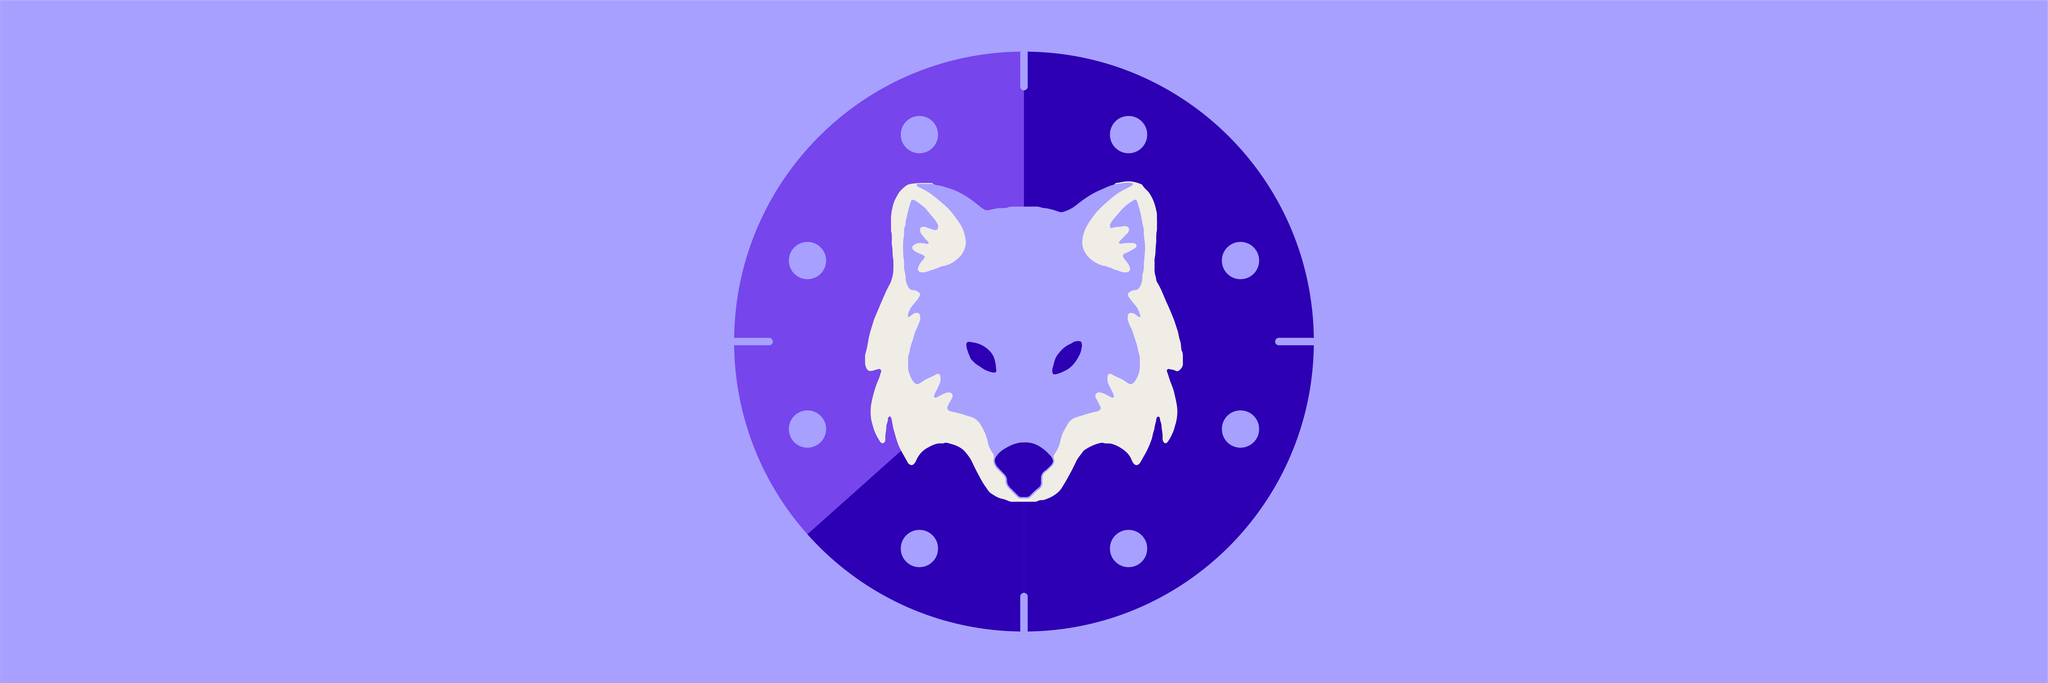 The head of a wolf in the center of a clock represents the wolf chronotype.